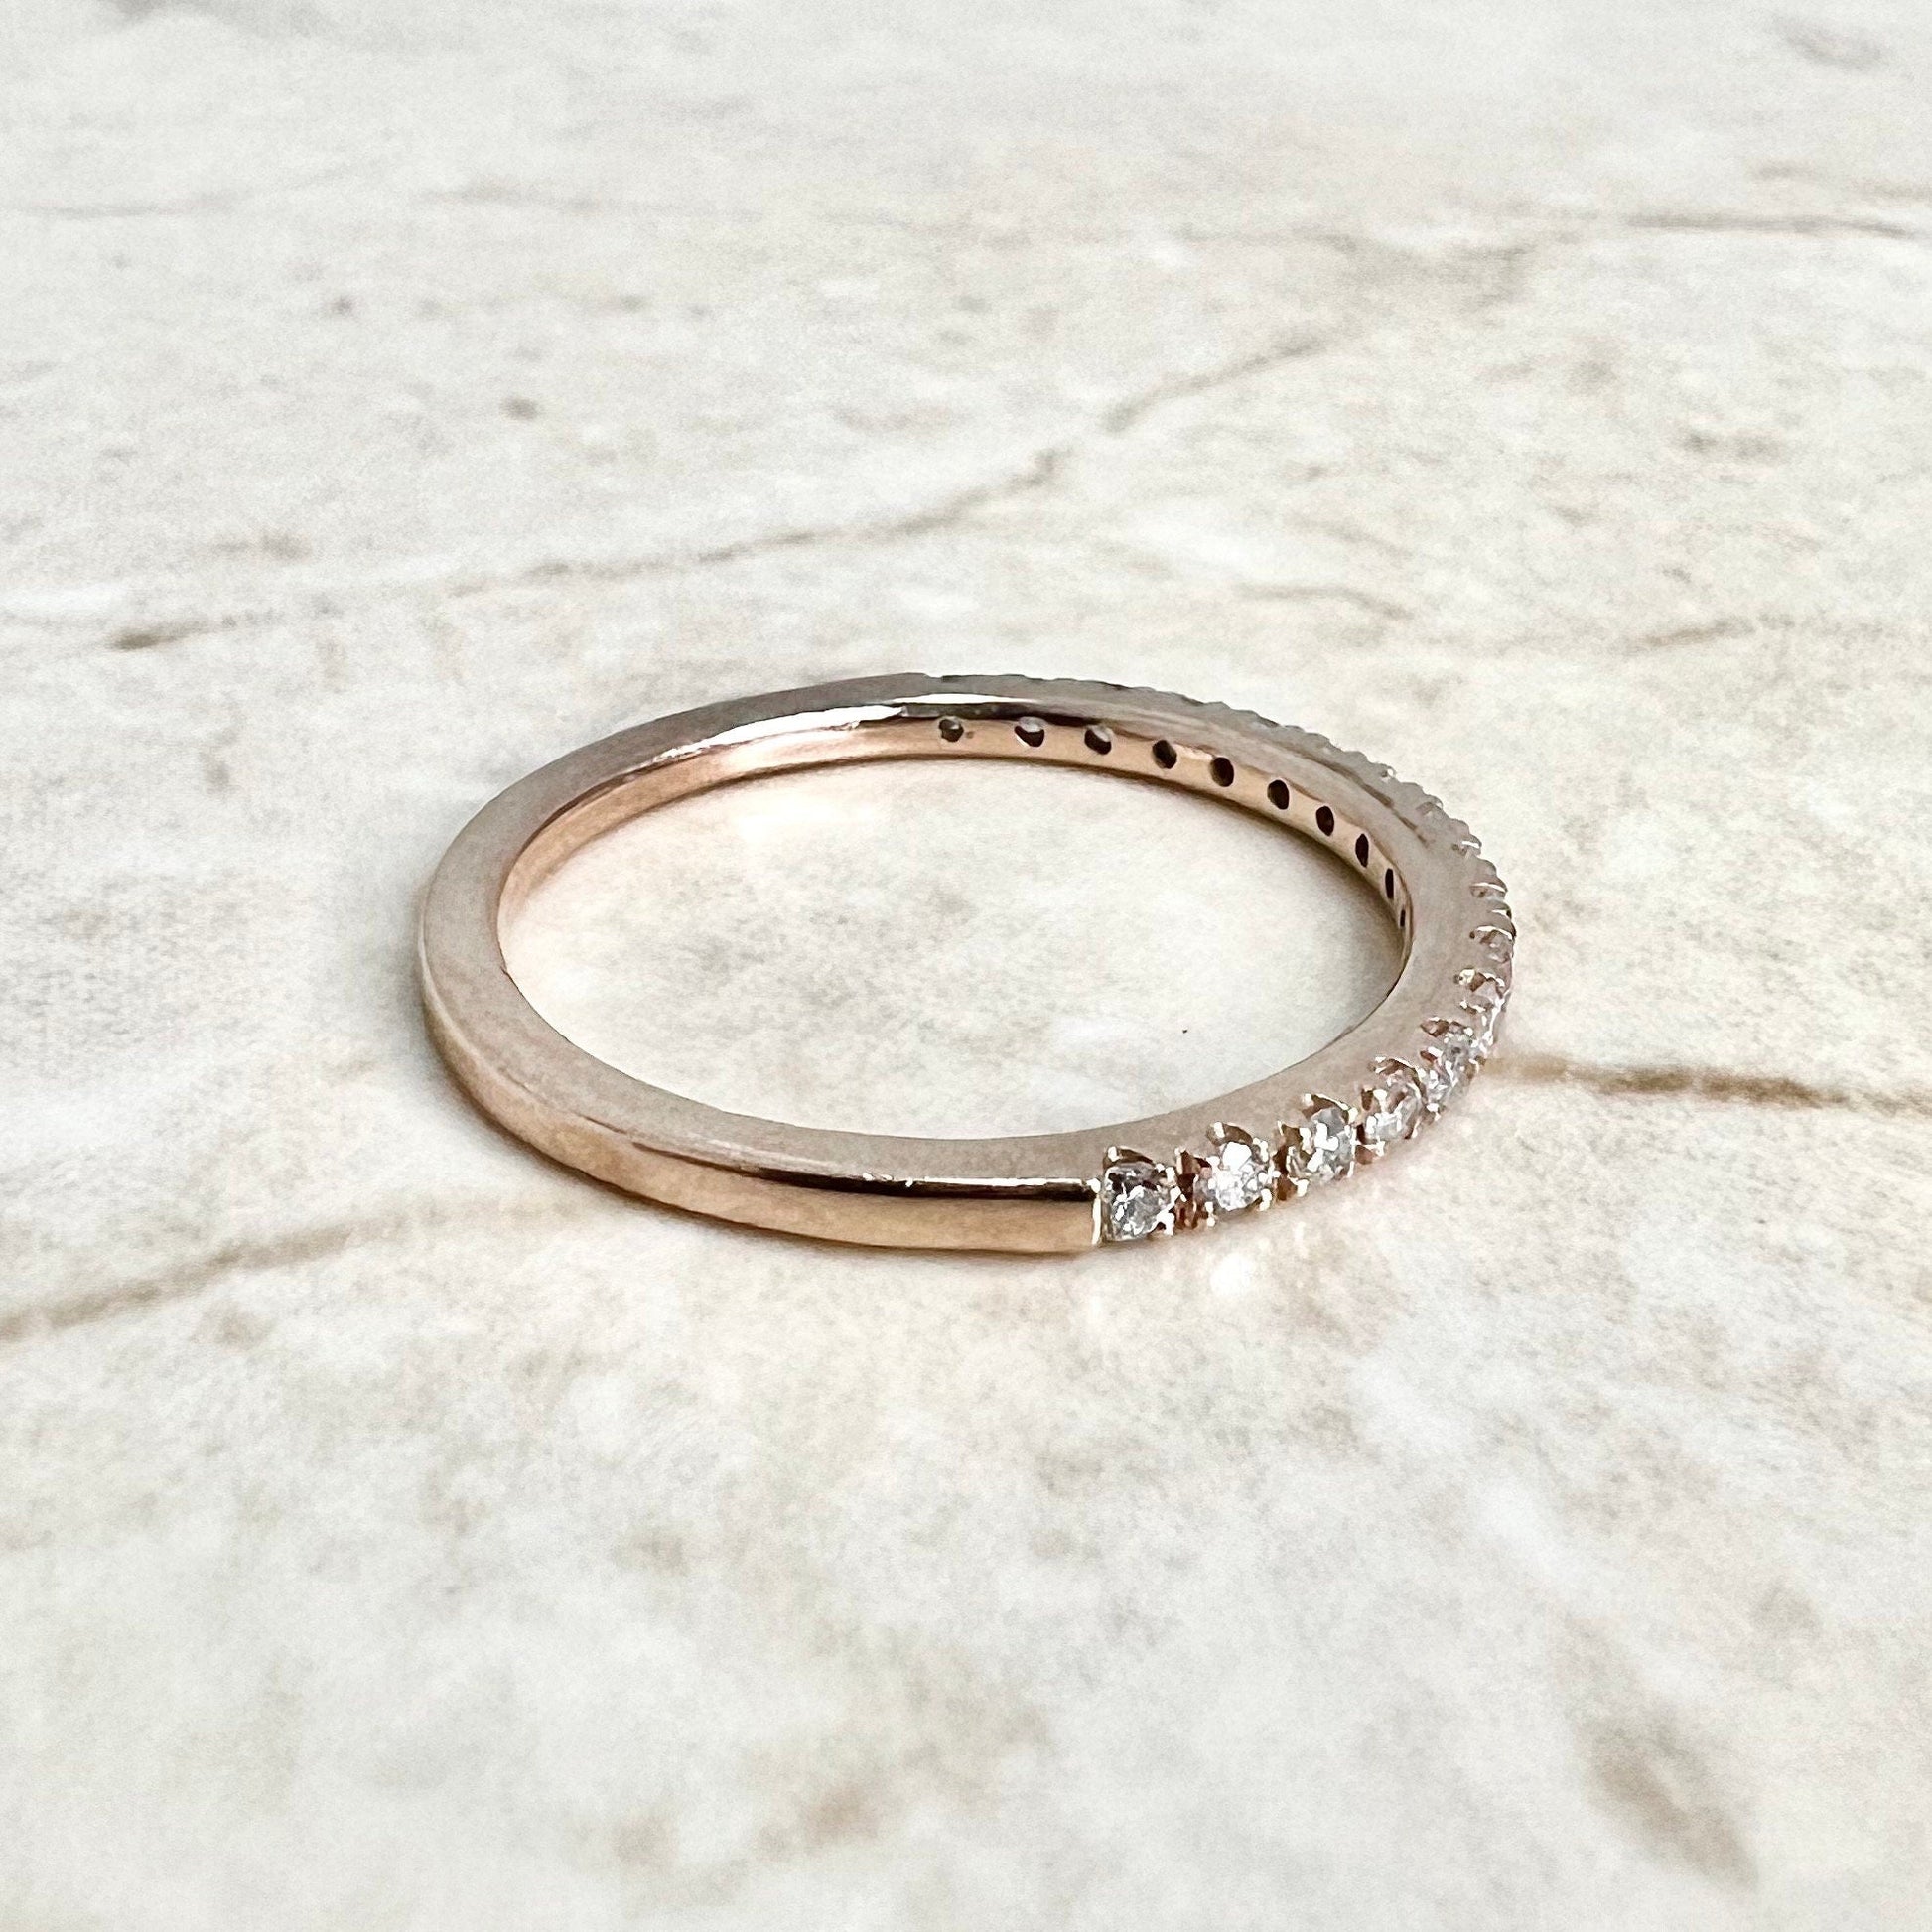 10K Half Eternity Diamond Band Ring - Rose Gold Wedding Band - Prong Set Band - Anniversary Ring - Diamond Wedding Ring - Best Gifts For Her